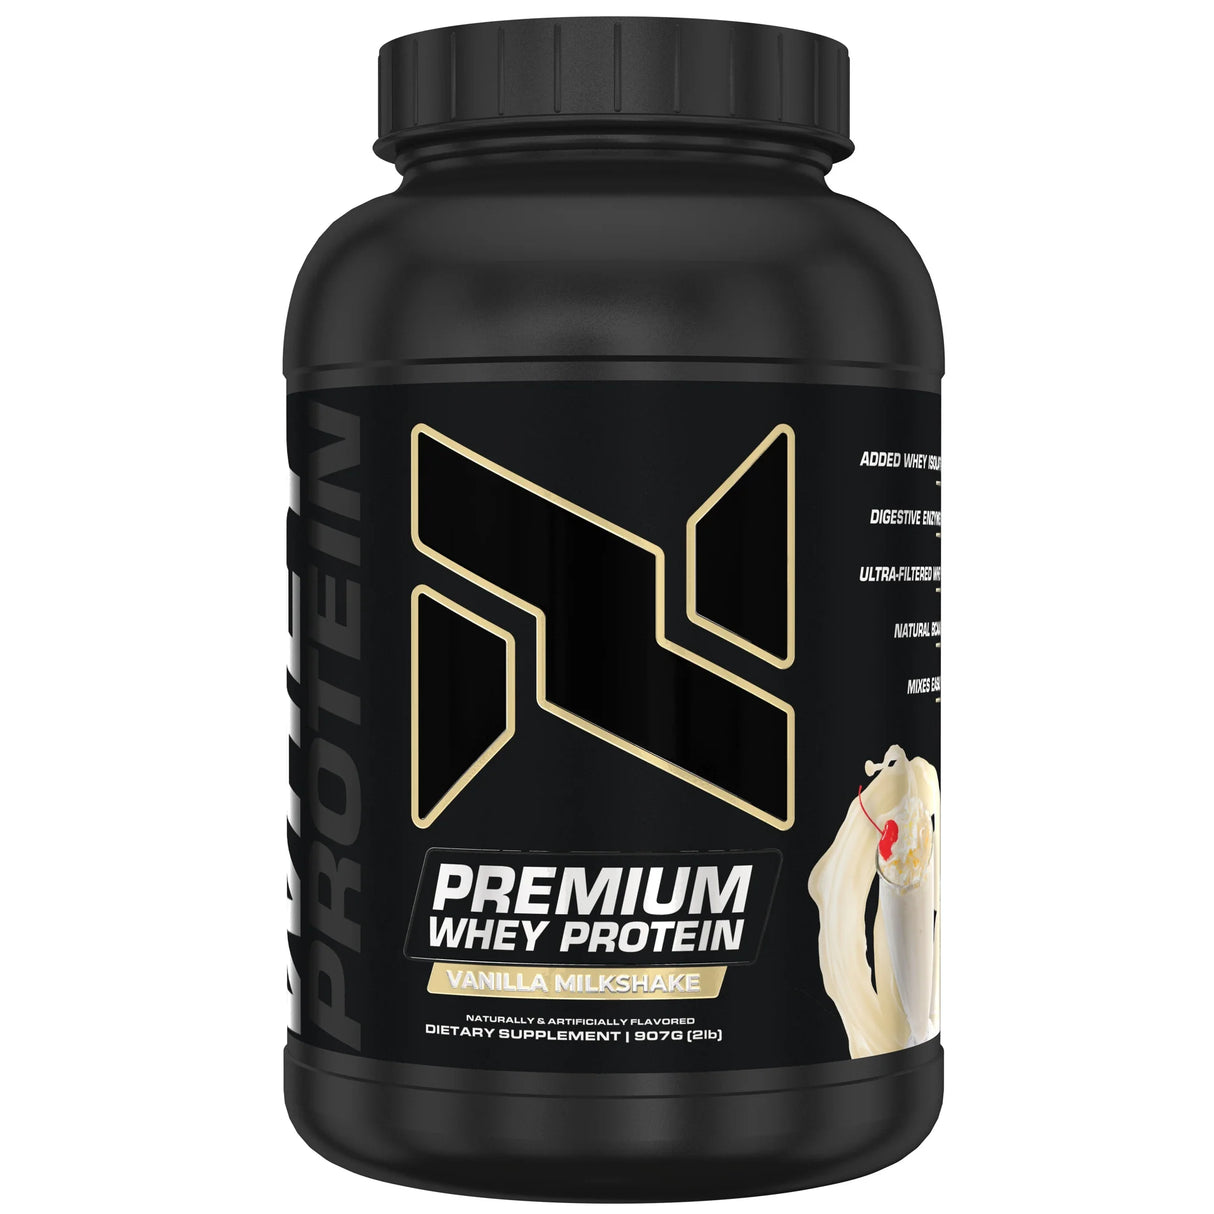 Premium Whey Protein - Nutra Innovations